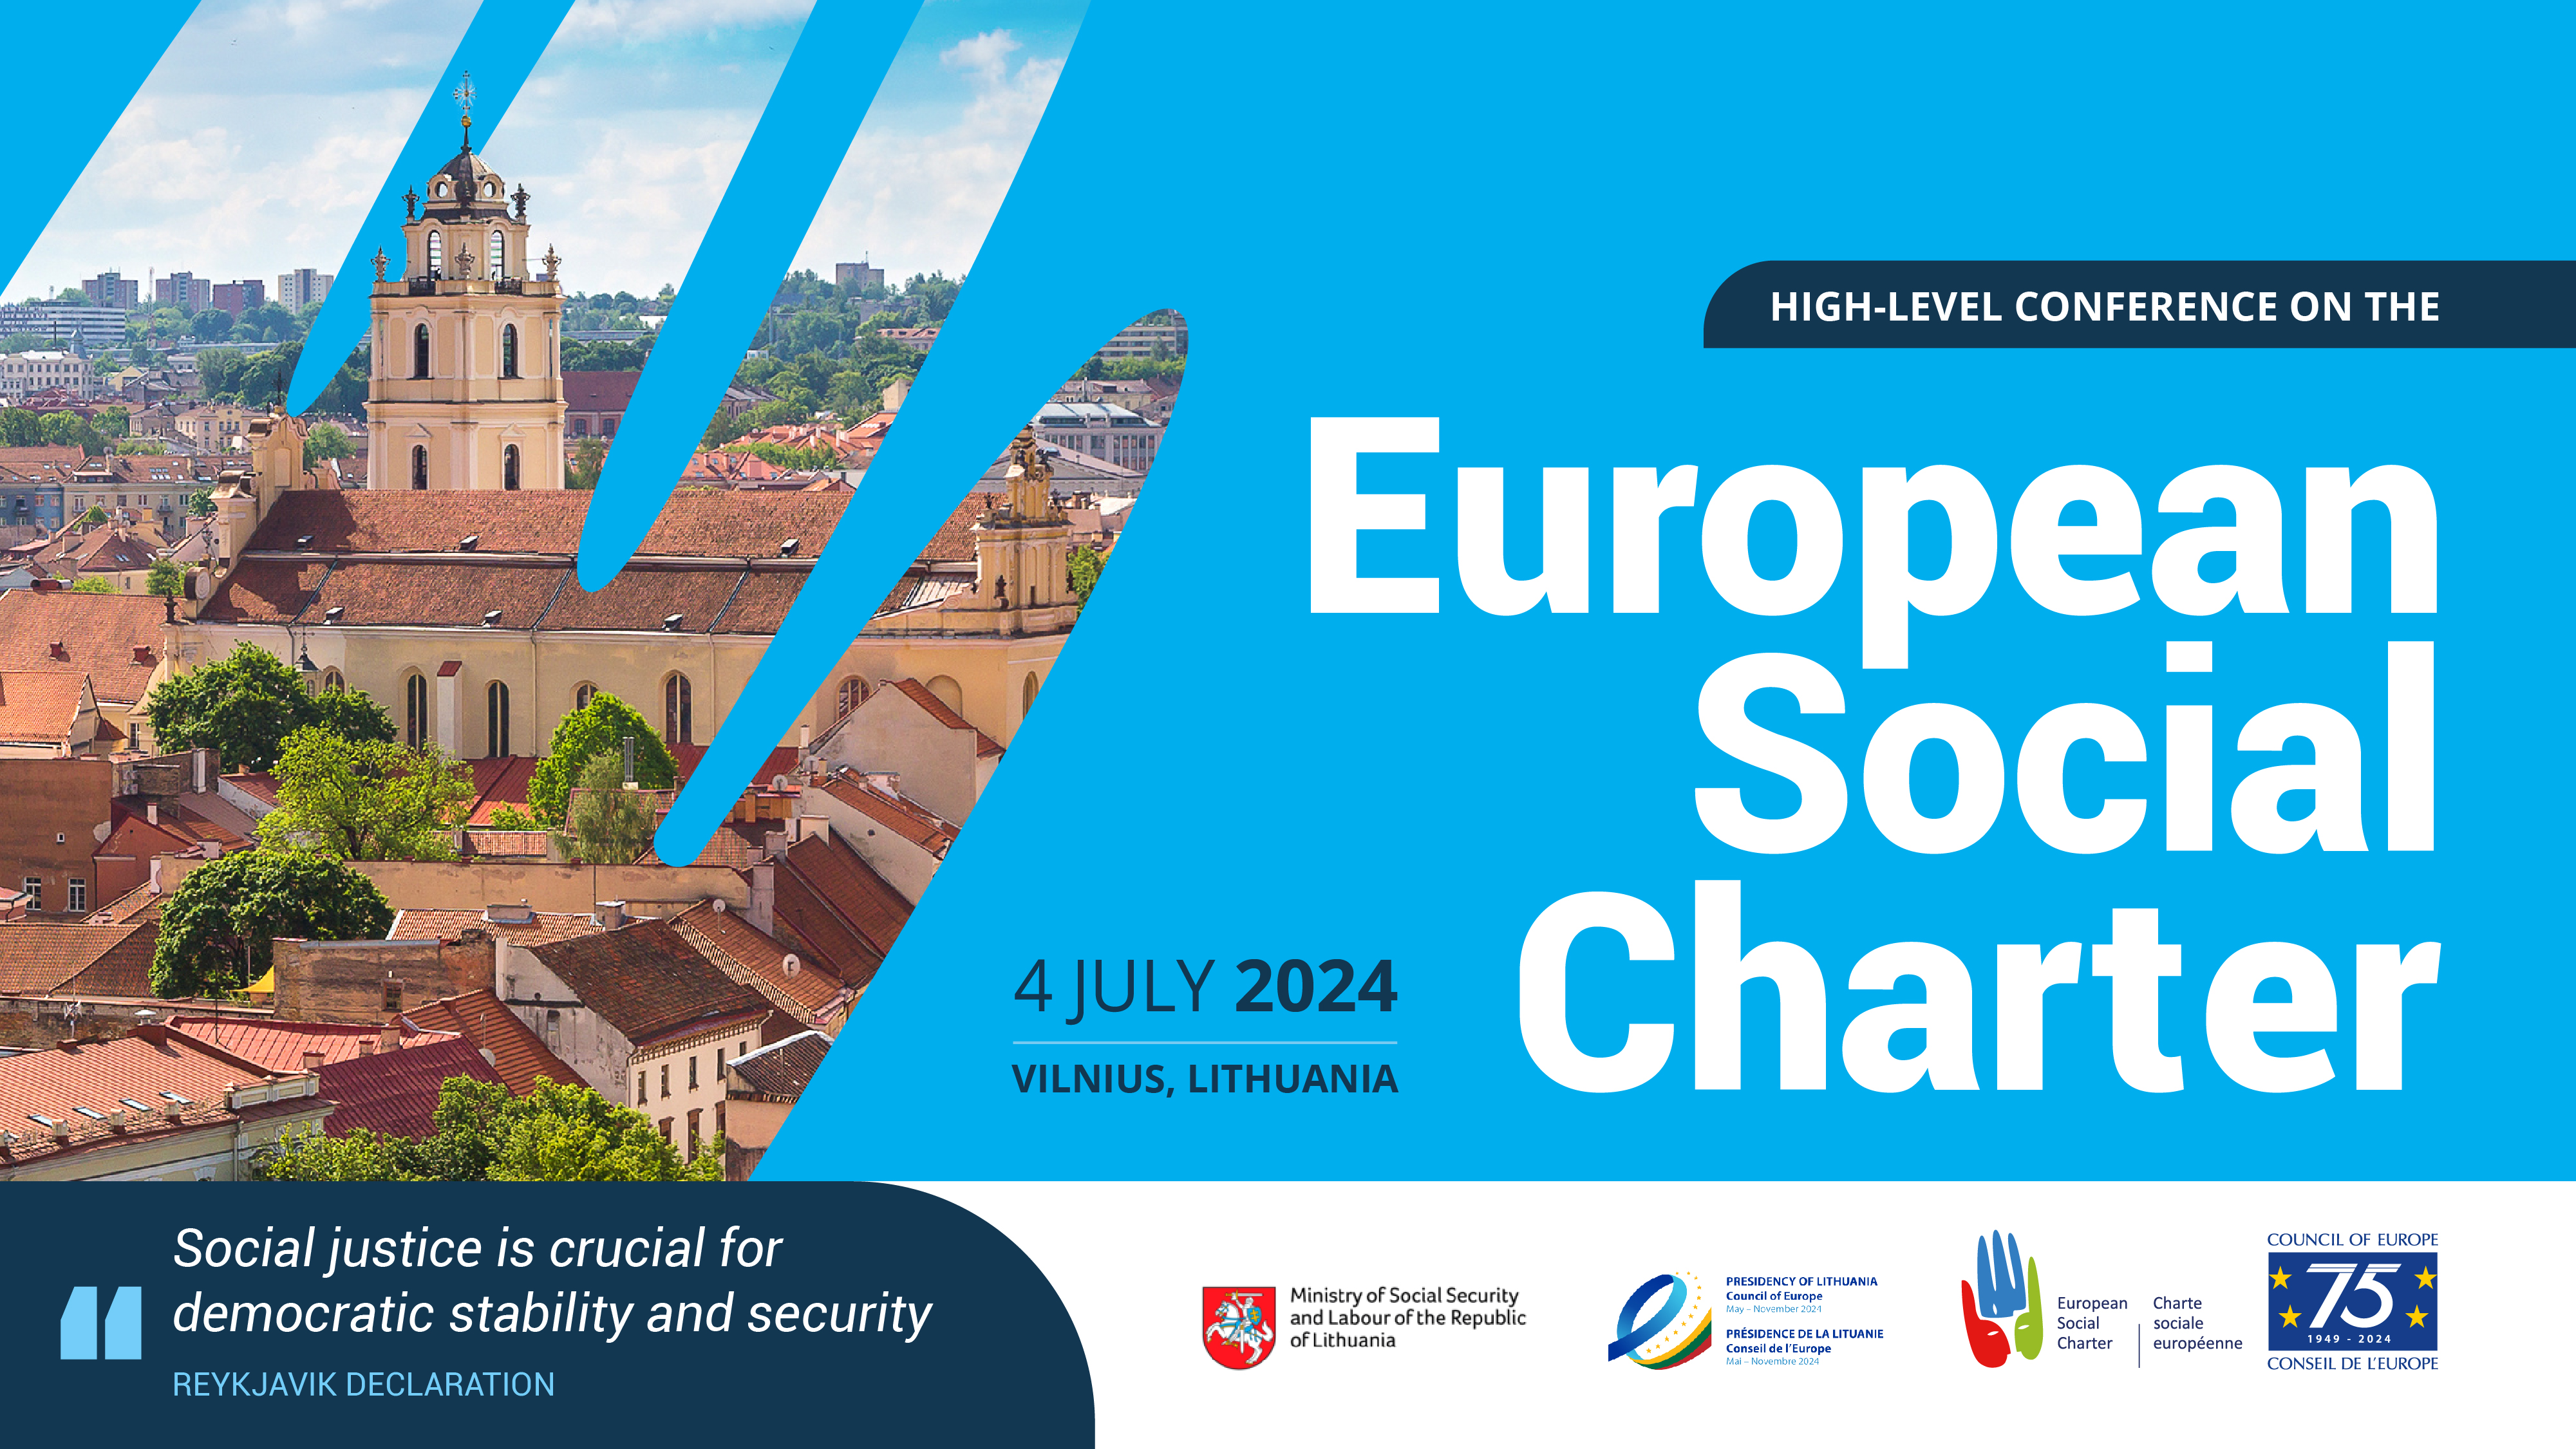 High-level Conference on the European Social Charter